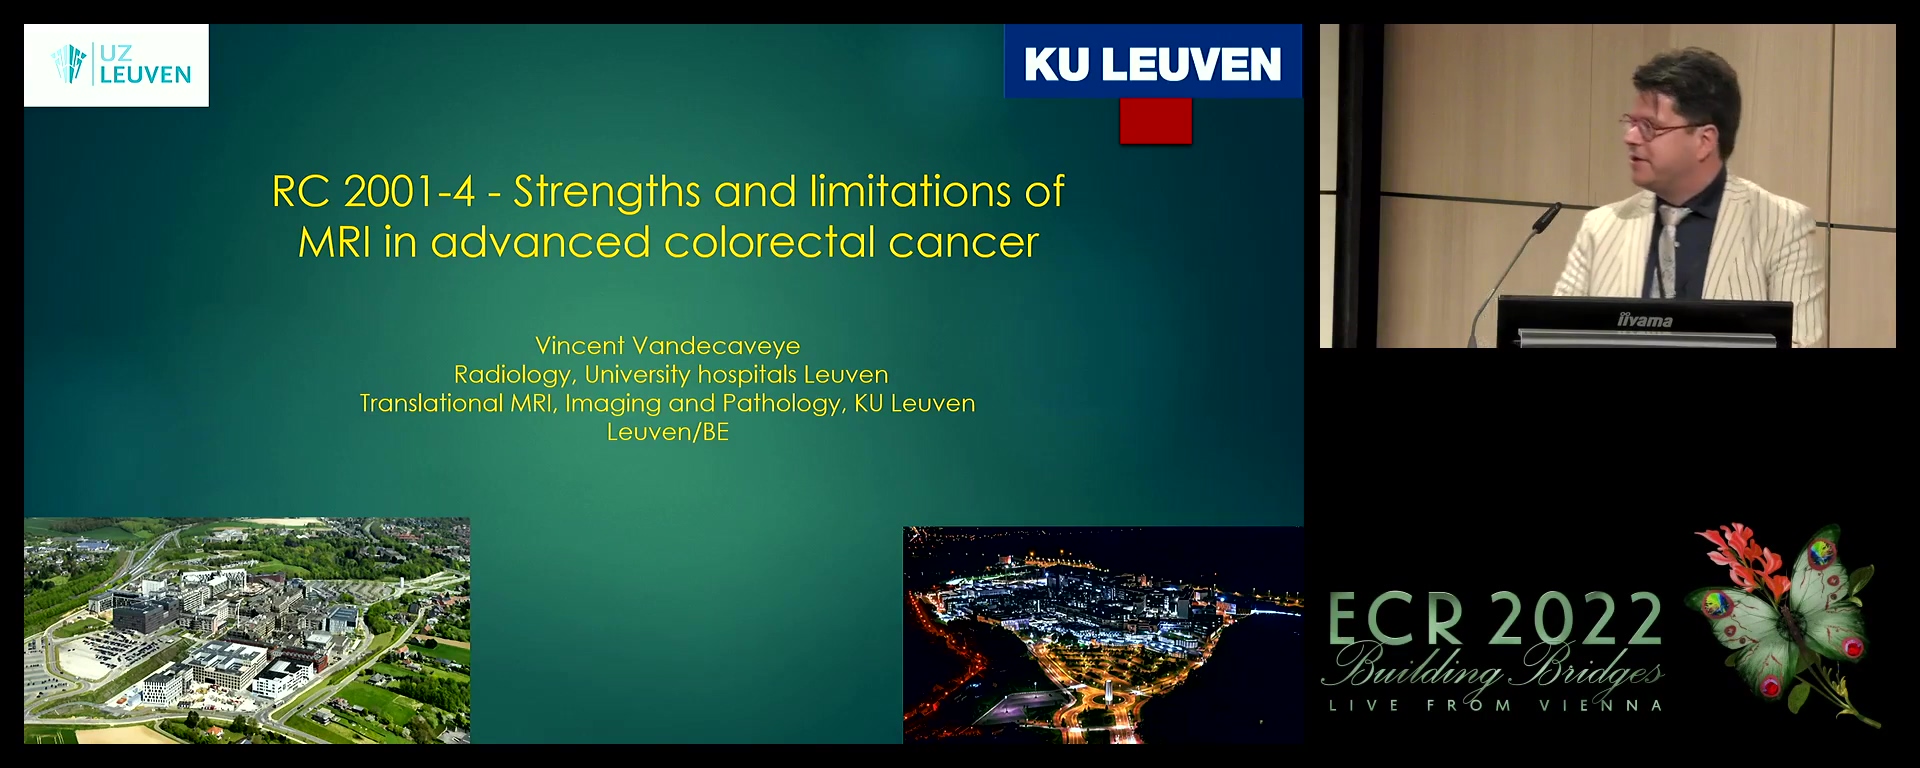 Strengths and limitations of MRI in advanced colorectal cancer - Vincent Vandecaveye, Leuven / BE